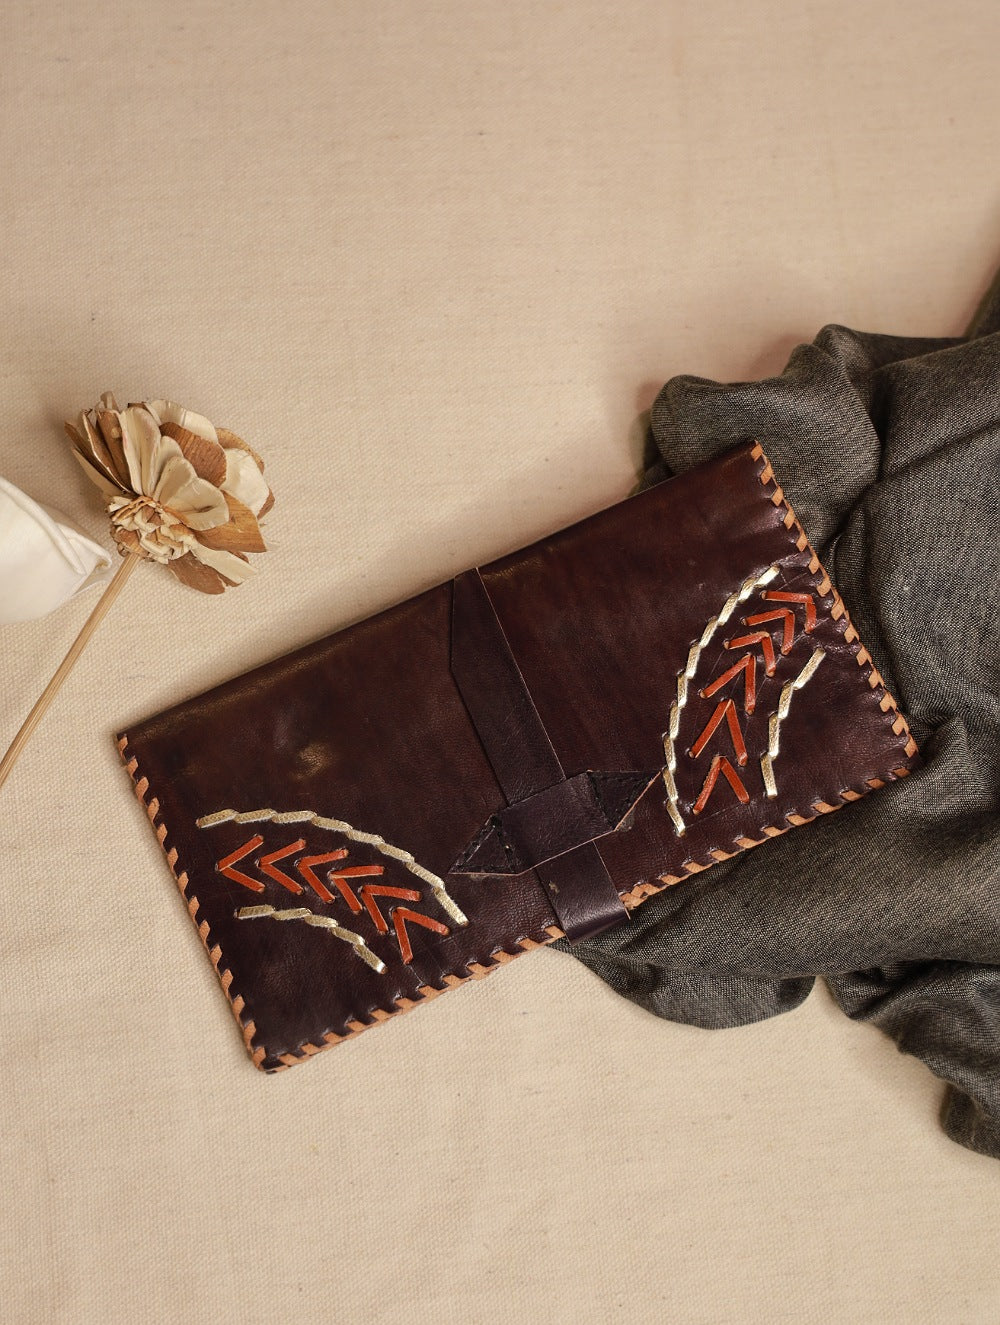 Load image into Gallery viewer, Handcrafted Jawaja Leather Wallet - Dark Brown